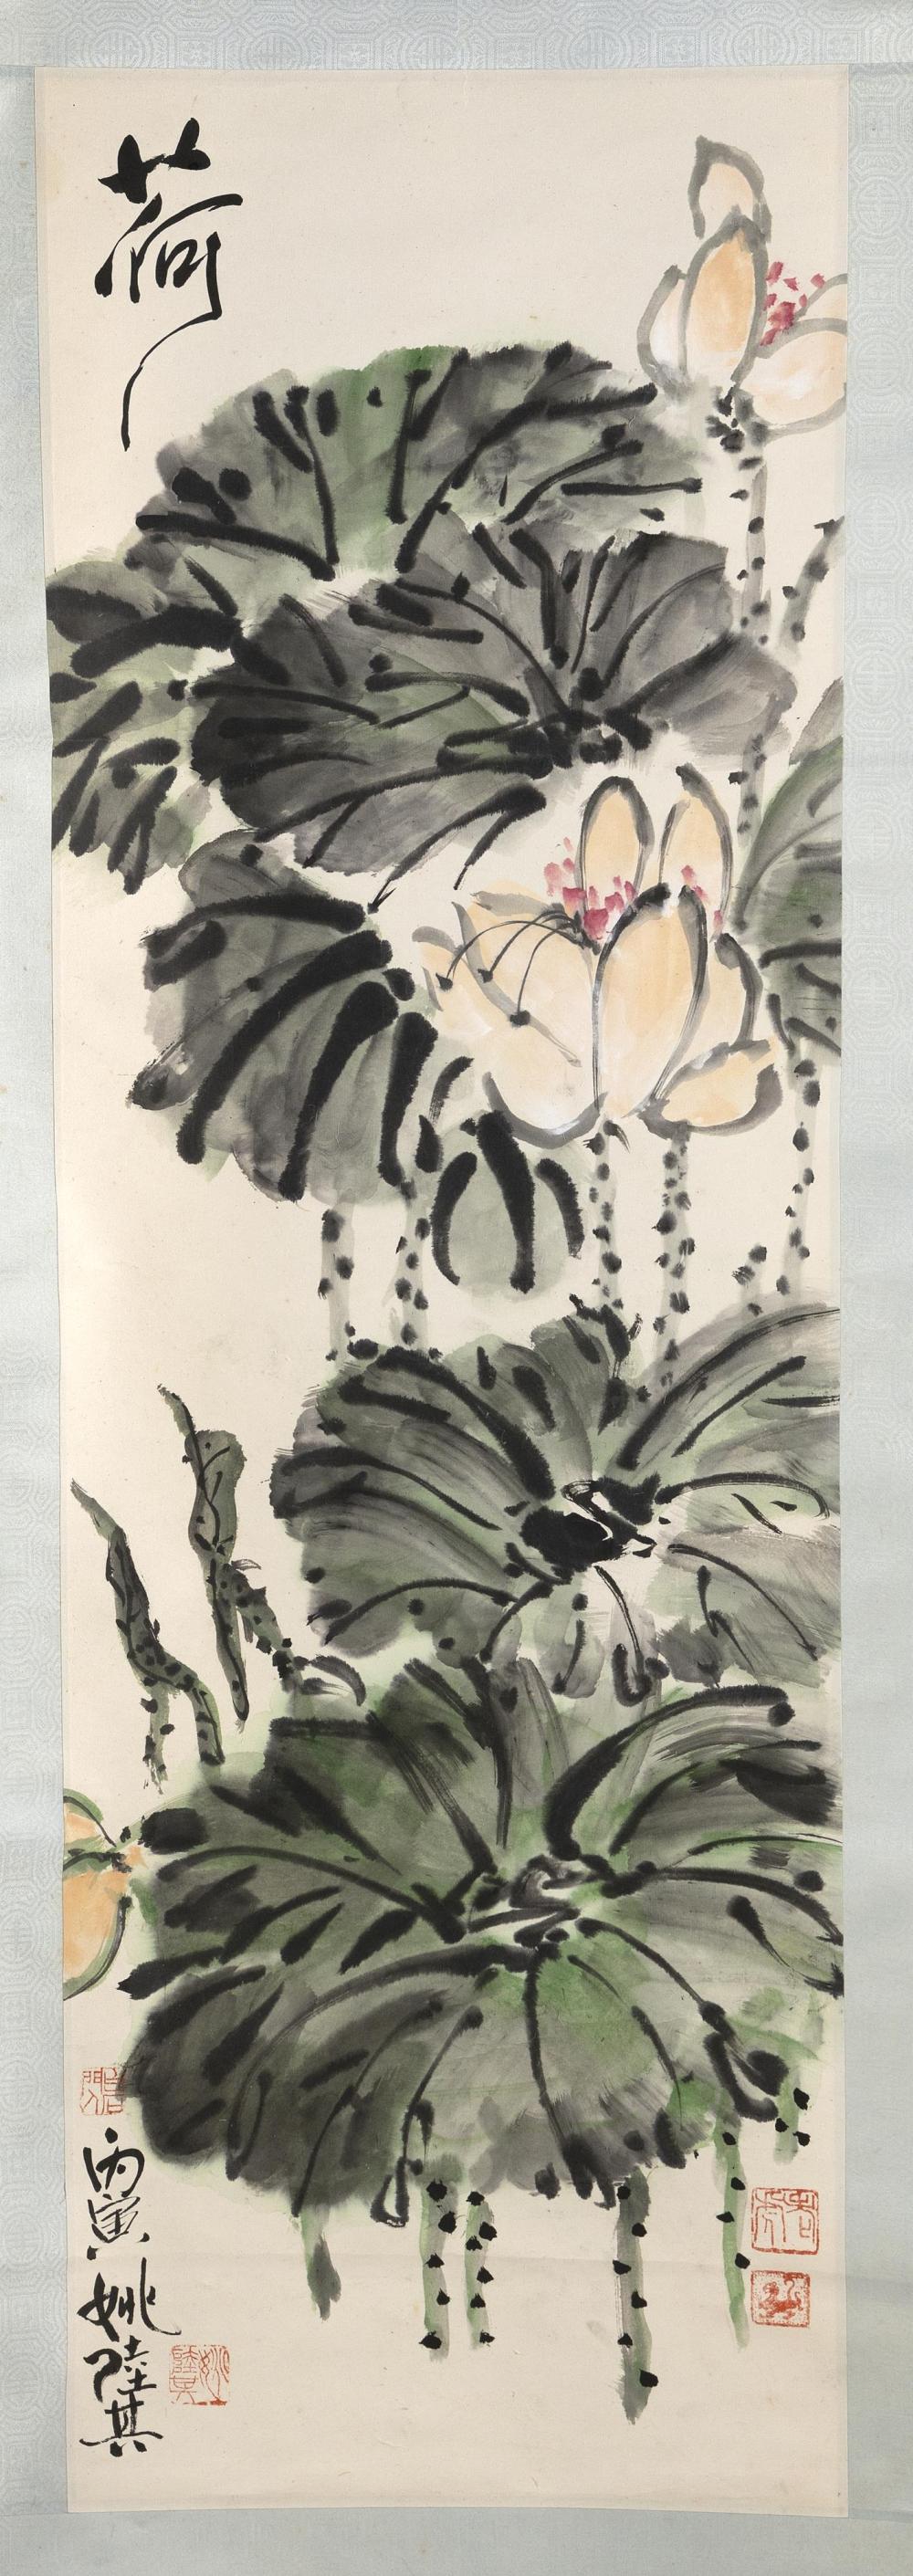 CHINESE SCROLL PAINTING ON PAPER 34c27f